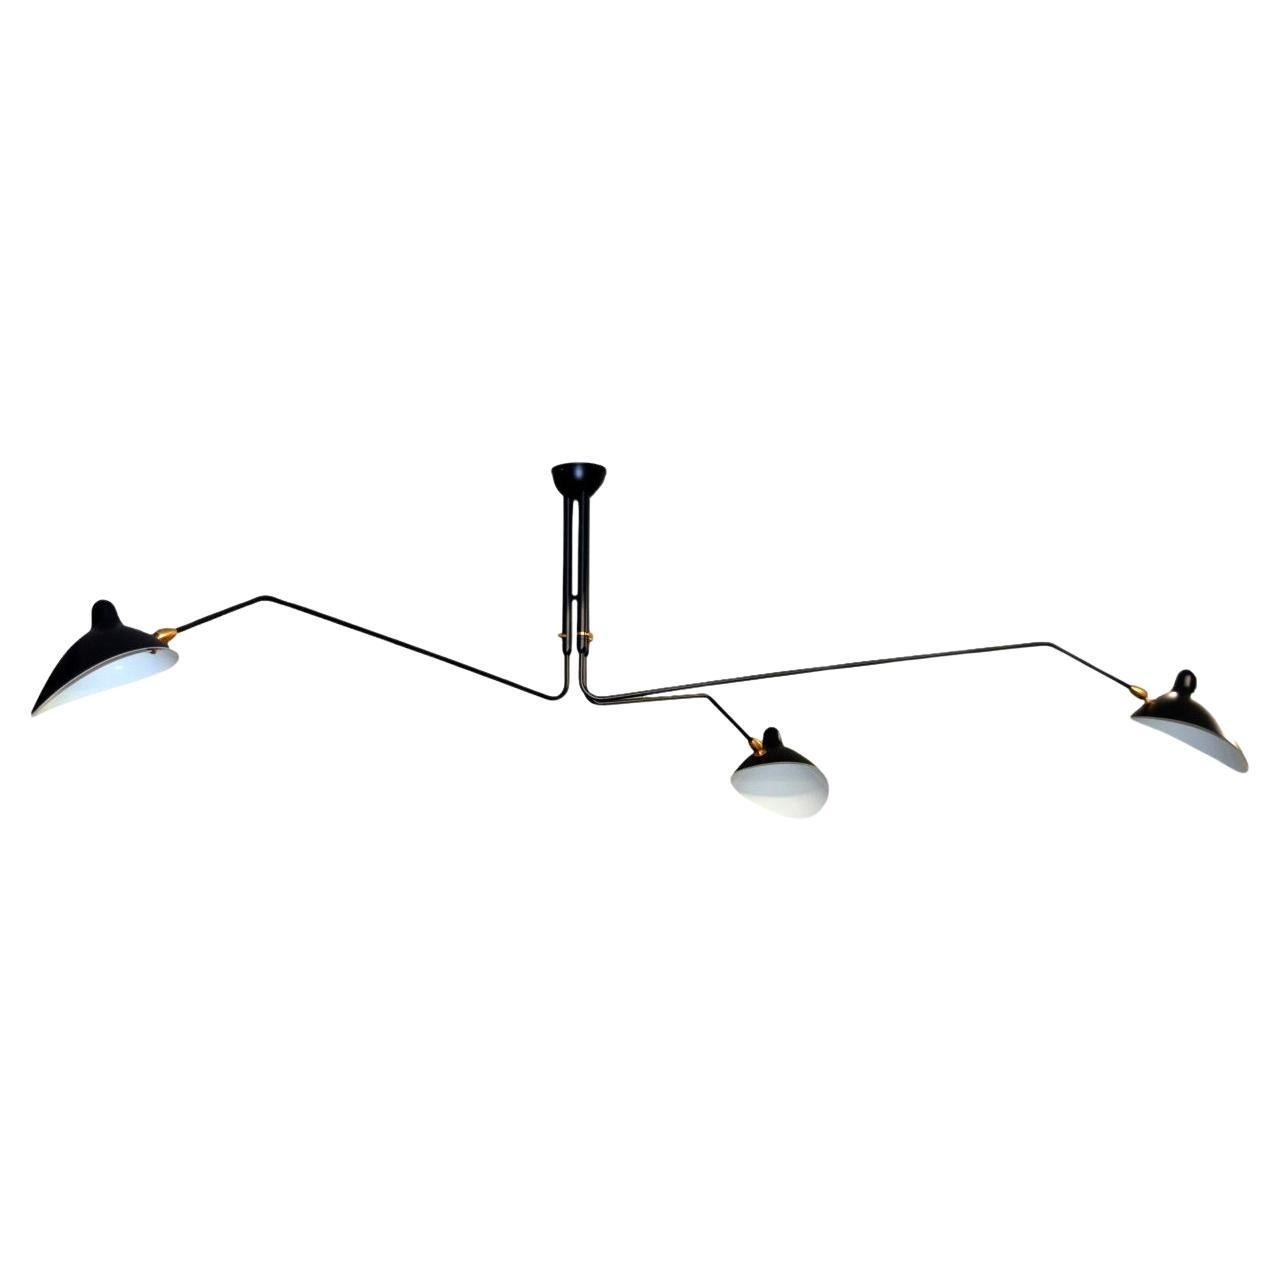 Serge Mouille - Ceiling Lamp 3 Rotating Arms - DROP, ARM LENGTH CUSTOMIZABLE!